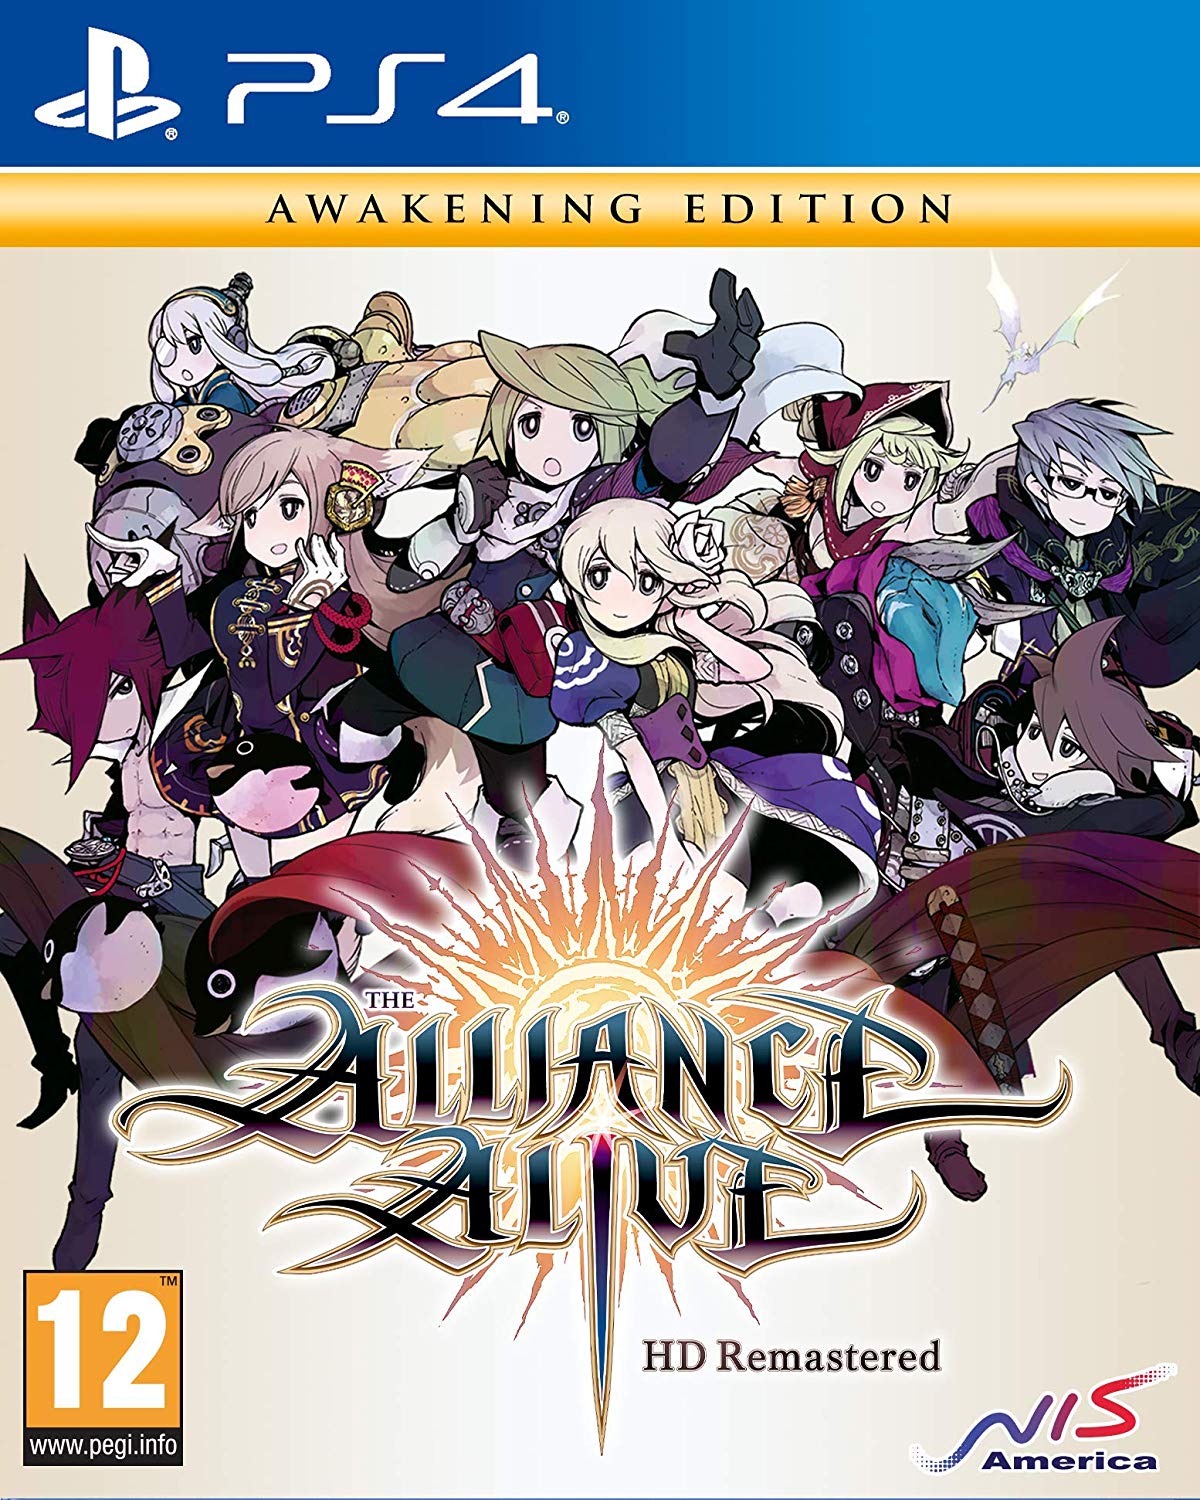 The Alliance Alive HD Remastered - Awakening Edition (PS4) - Offer Games